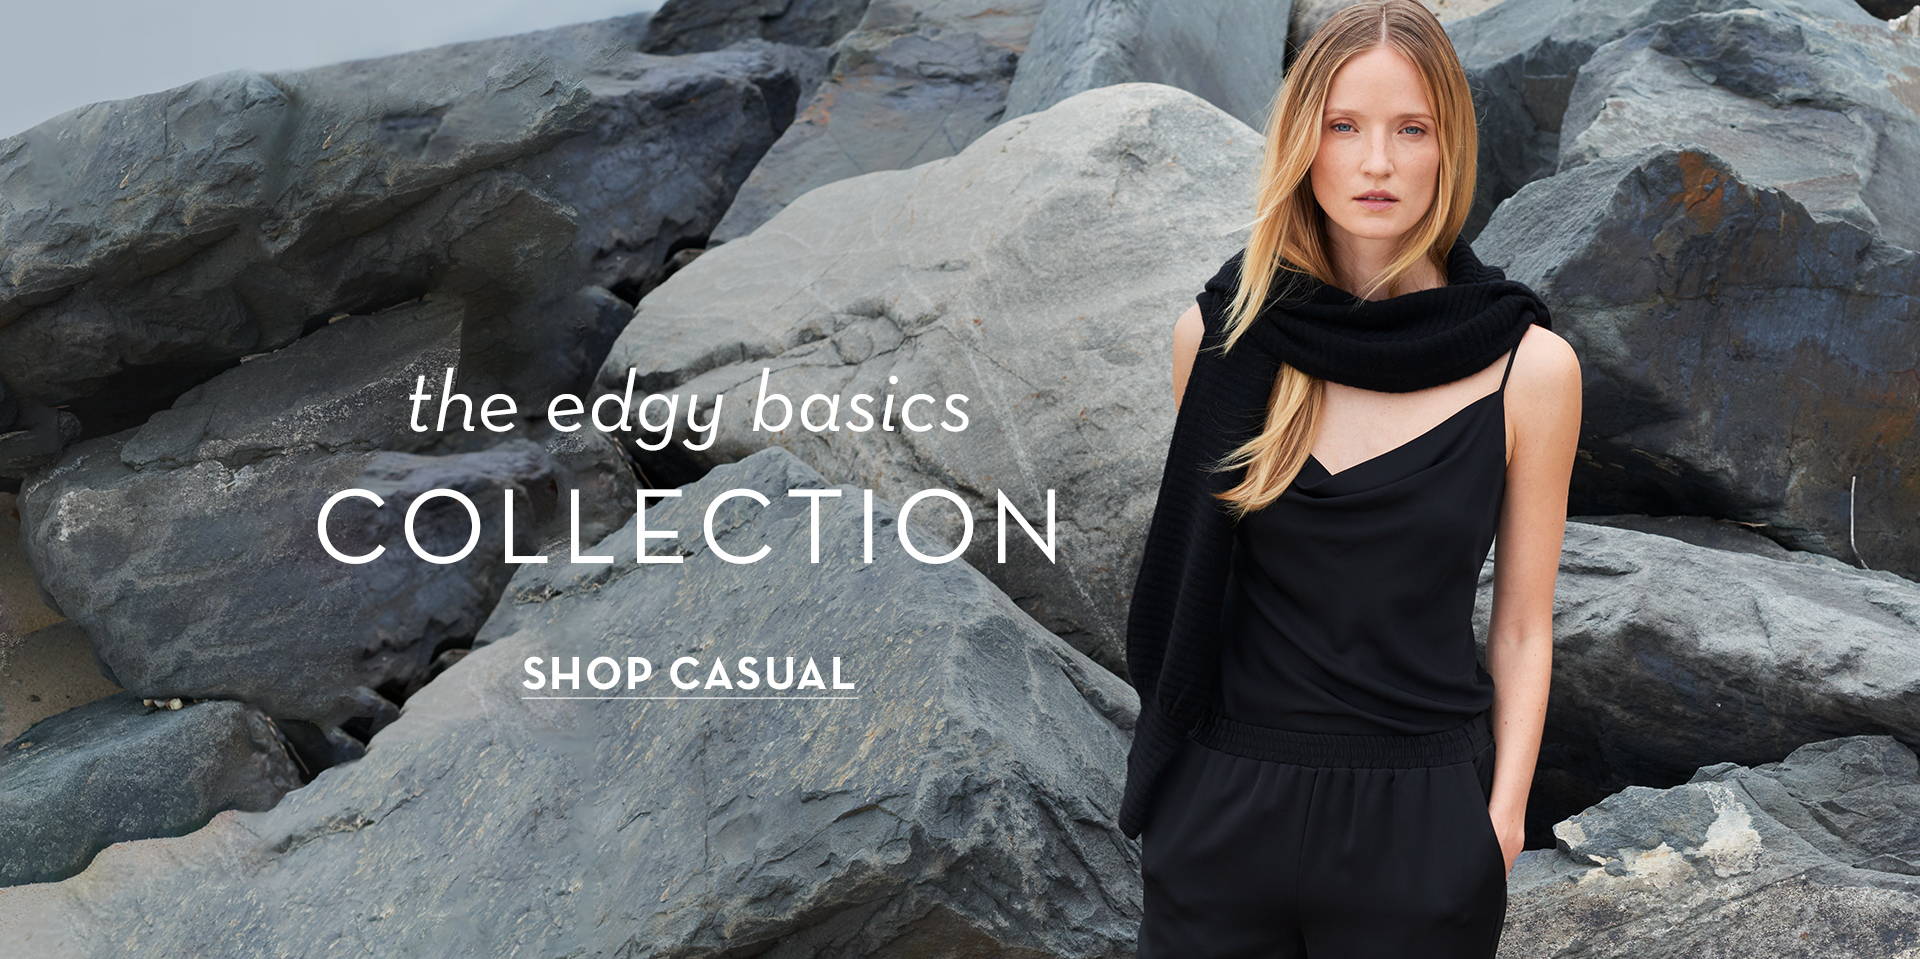 The Edgy basics collection, shop casual